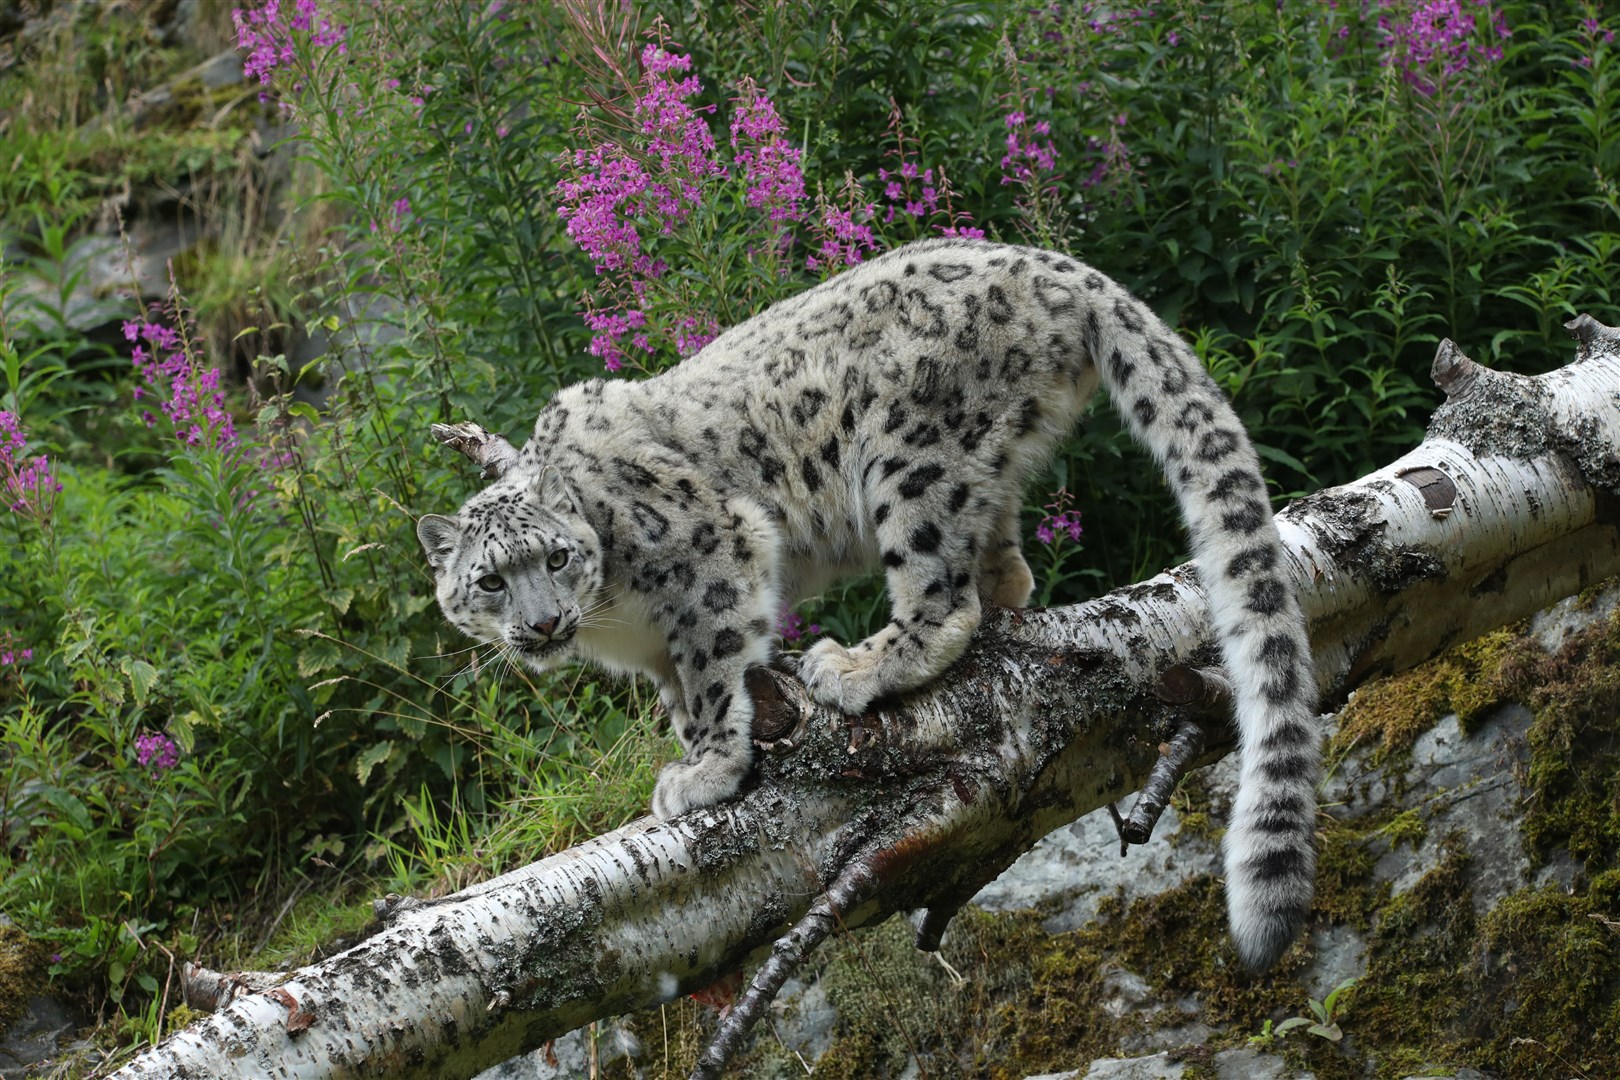 The Highland Wildlife Park owners had warned the attraction could be joining the snow leopard on the endangered list if it was unable to re-open soon.